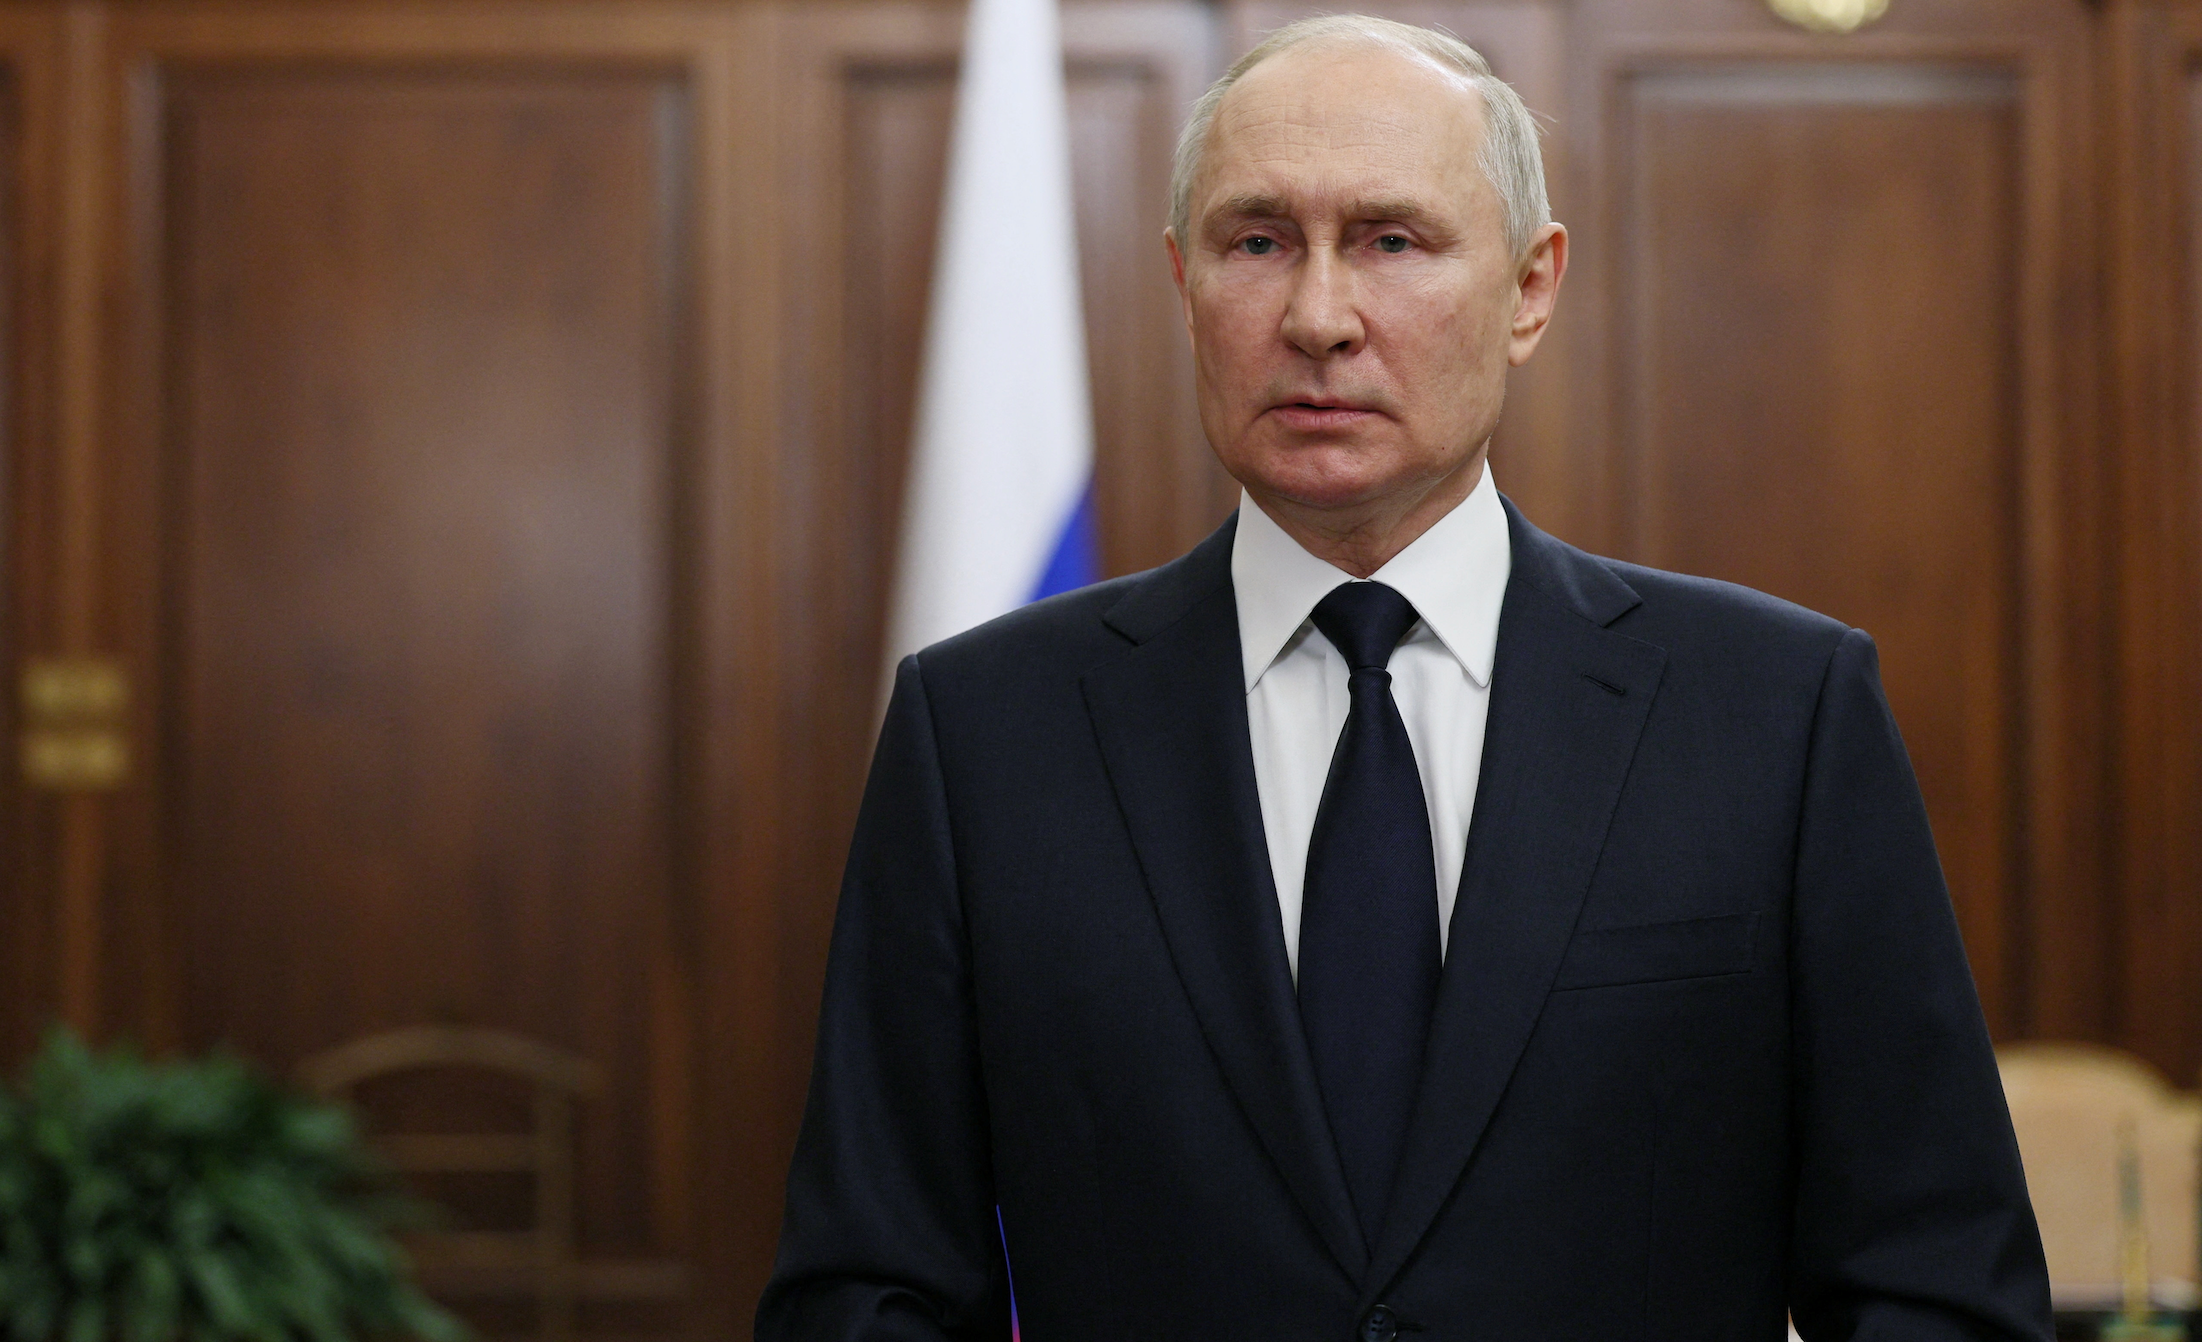 Russian President Vladimir Putin gives a televised address in Moscow, Russia